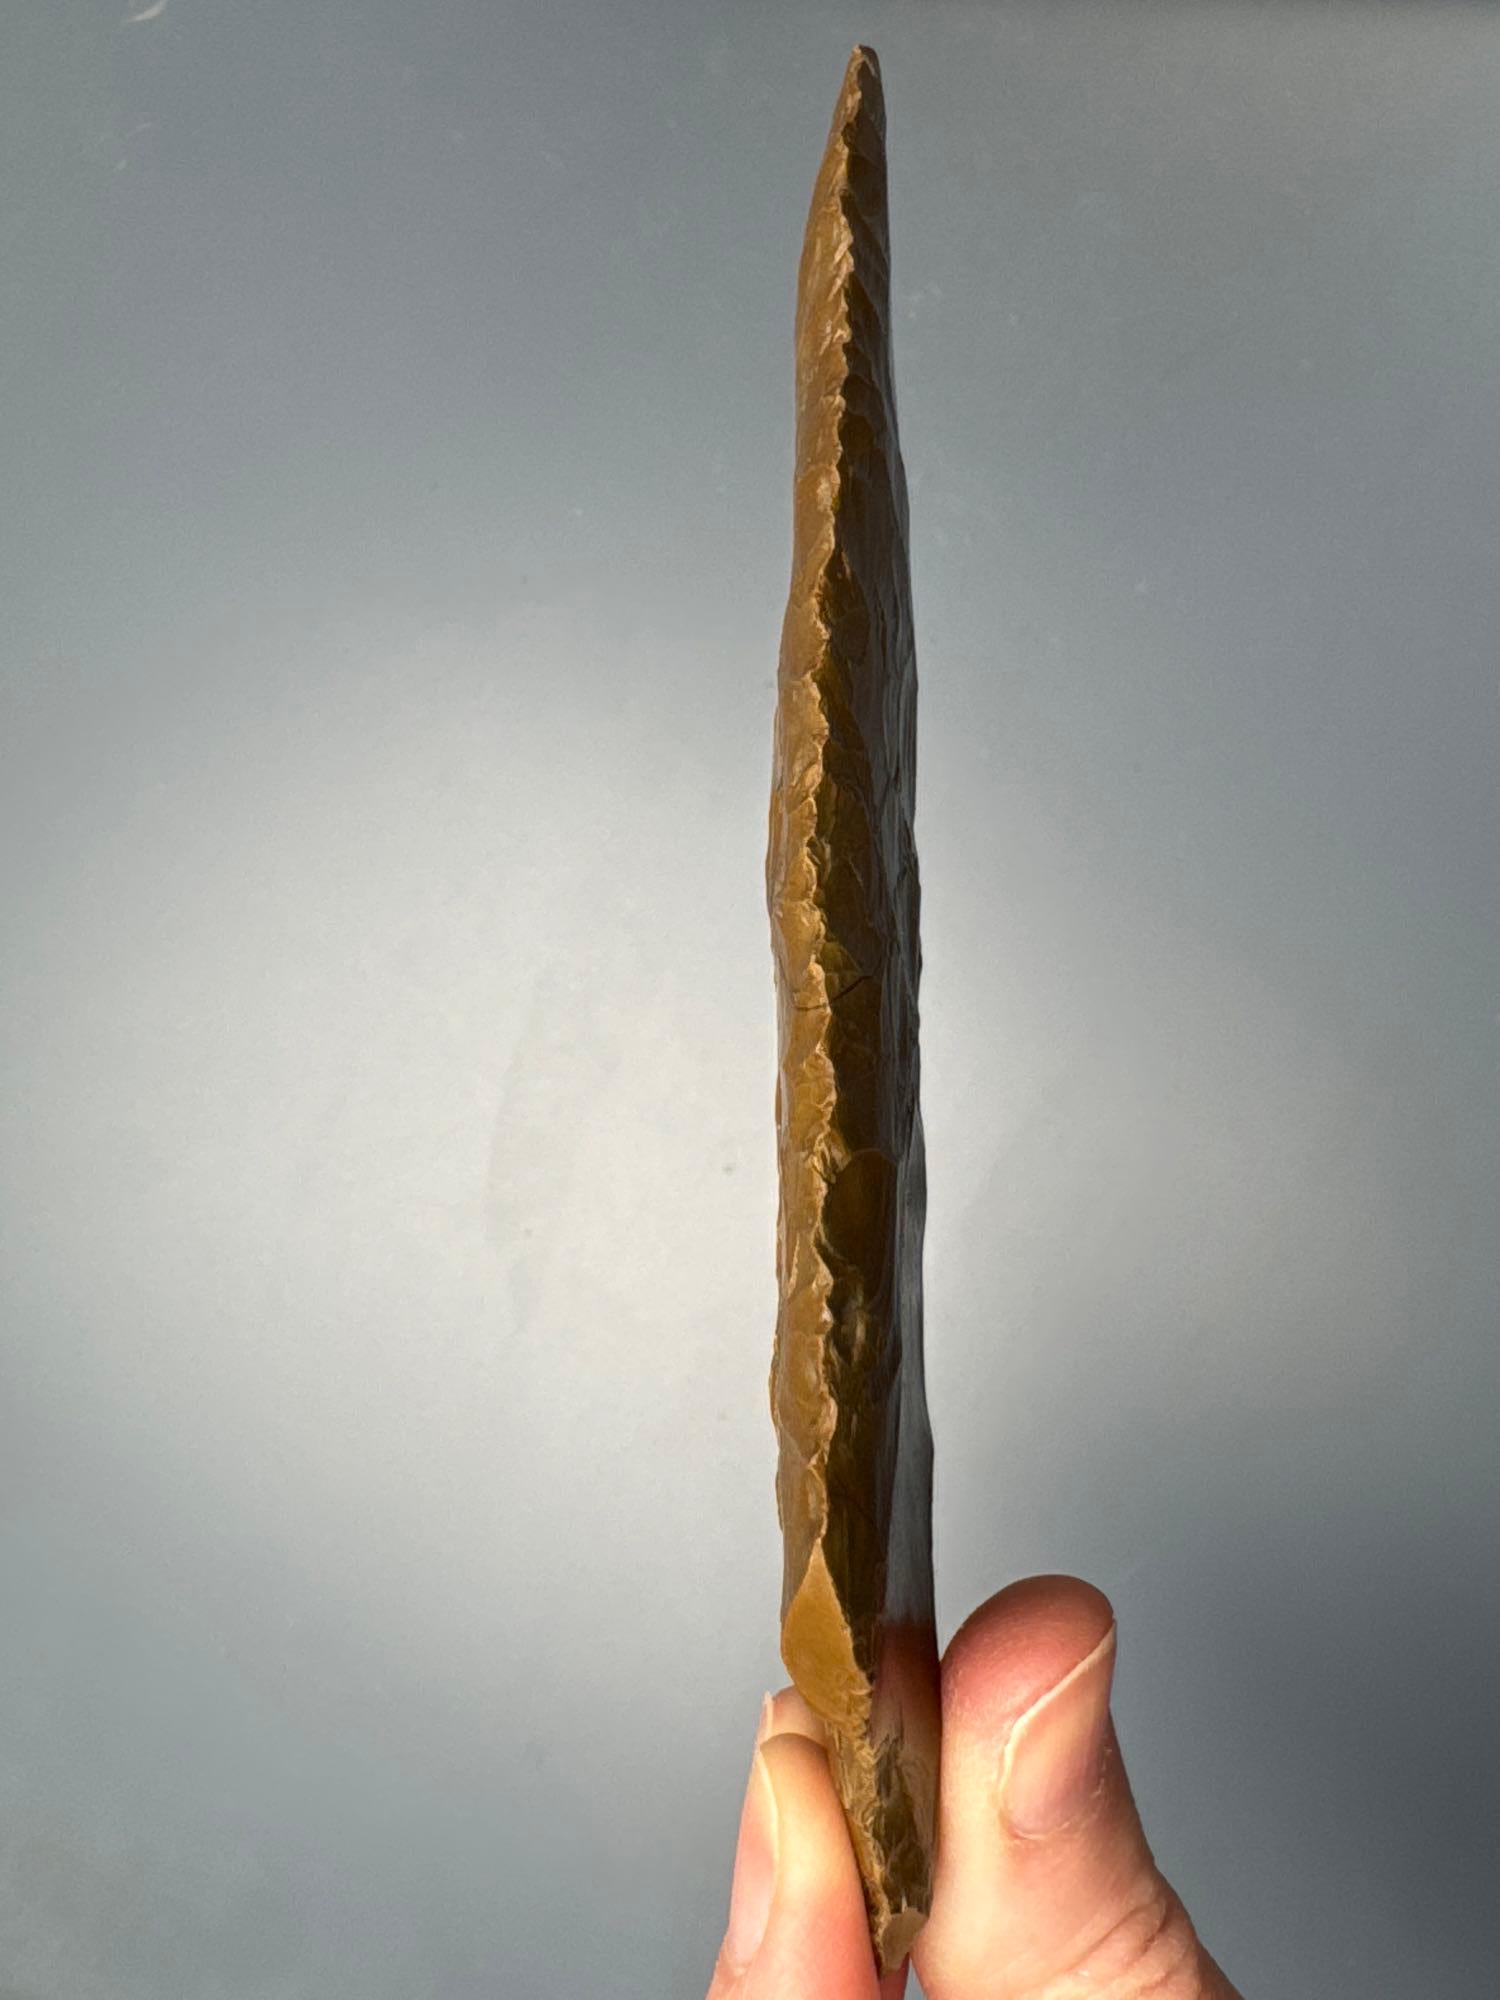 HIGHLIGHT 4 7/8" Brown Glossy Jasper Lehigh Broadpoint, Found at the Border of Cumberland and Atlant